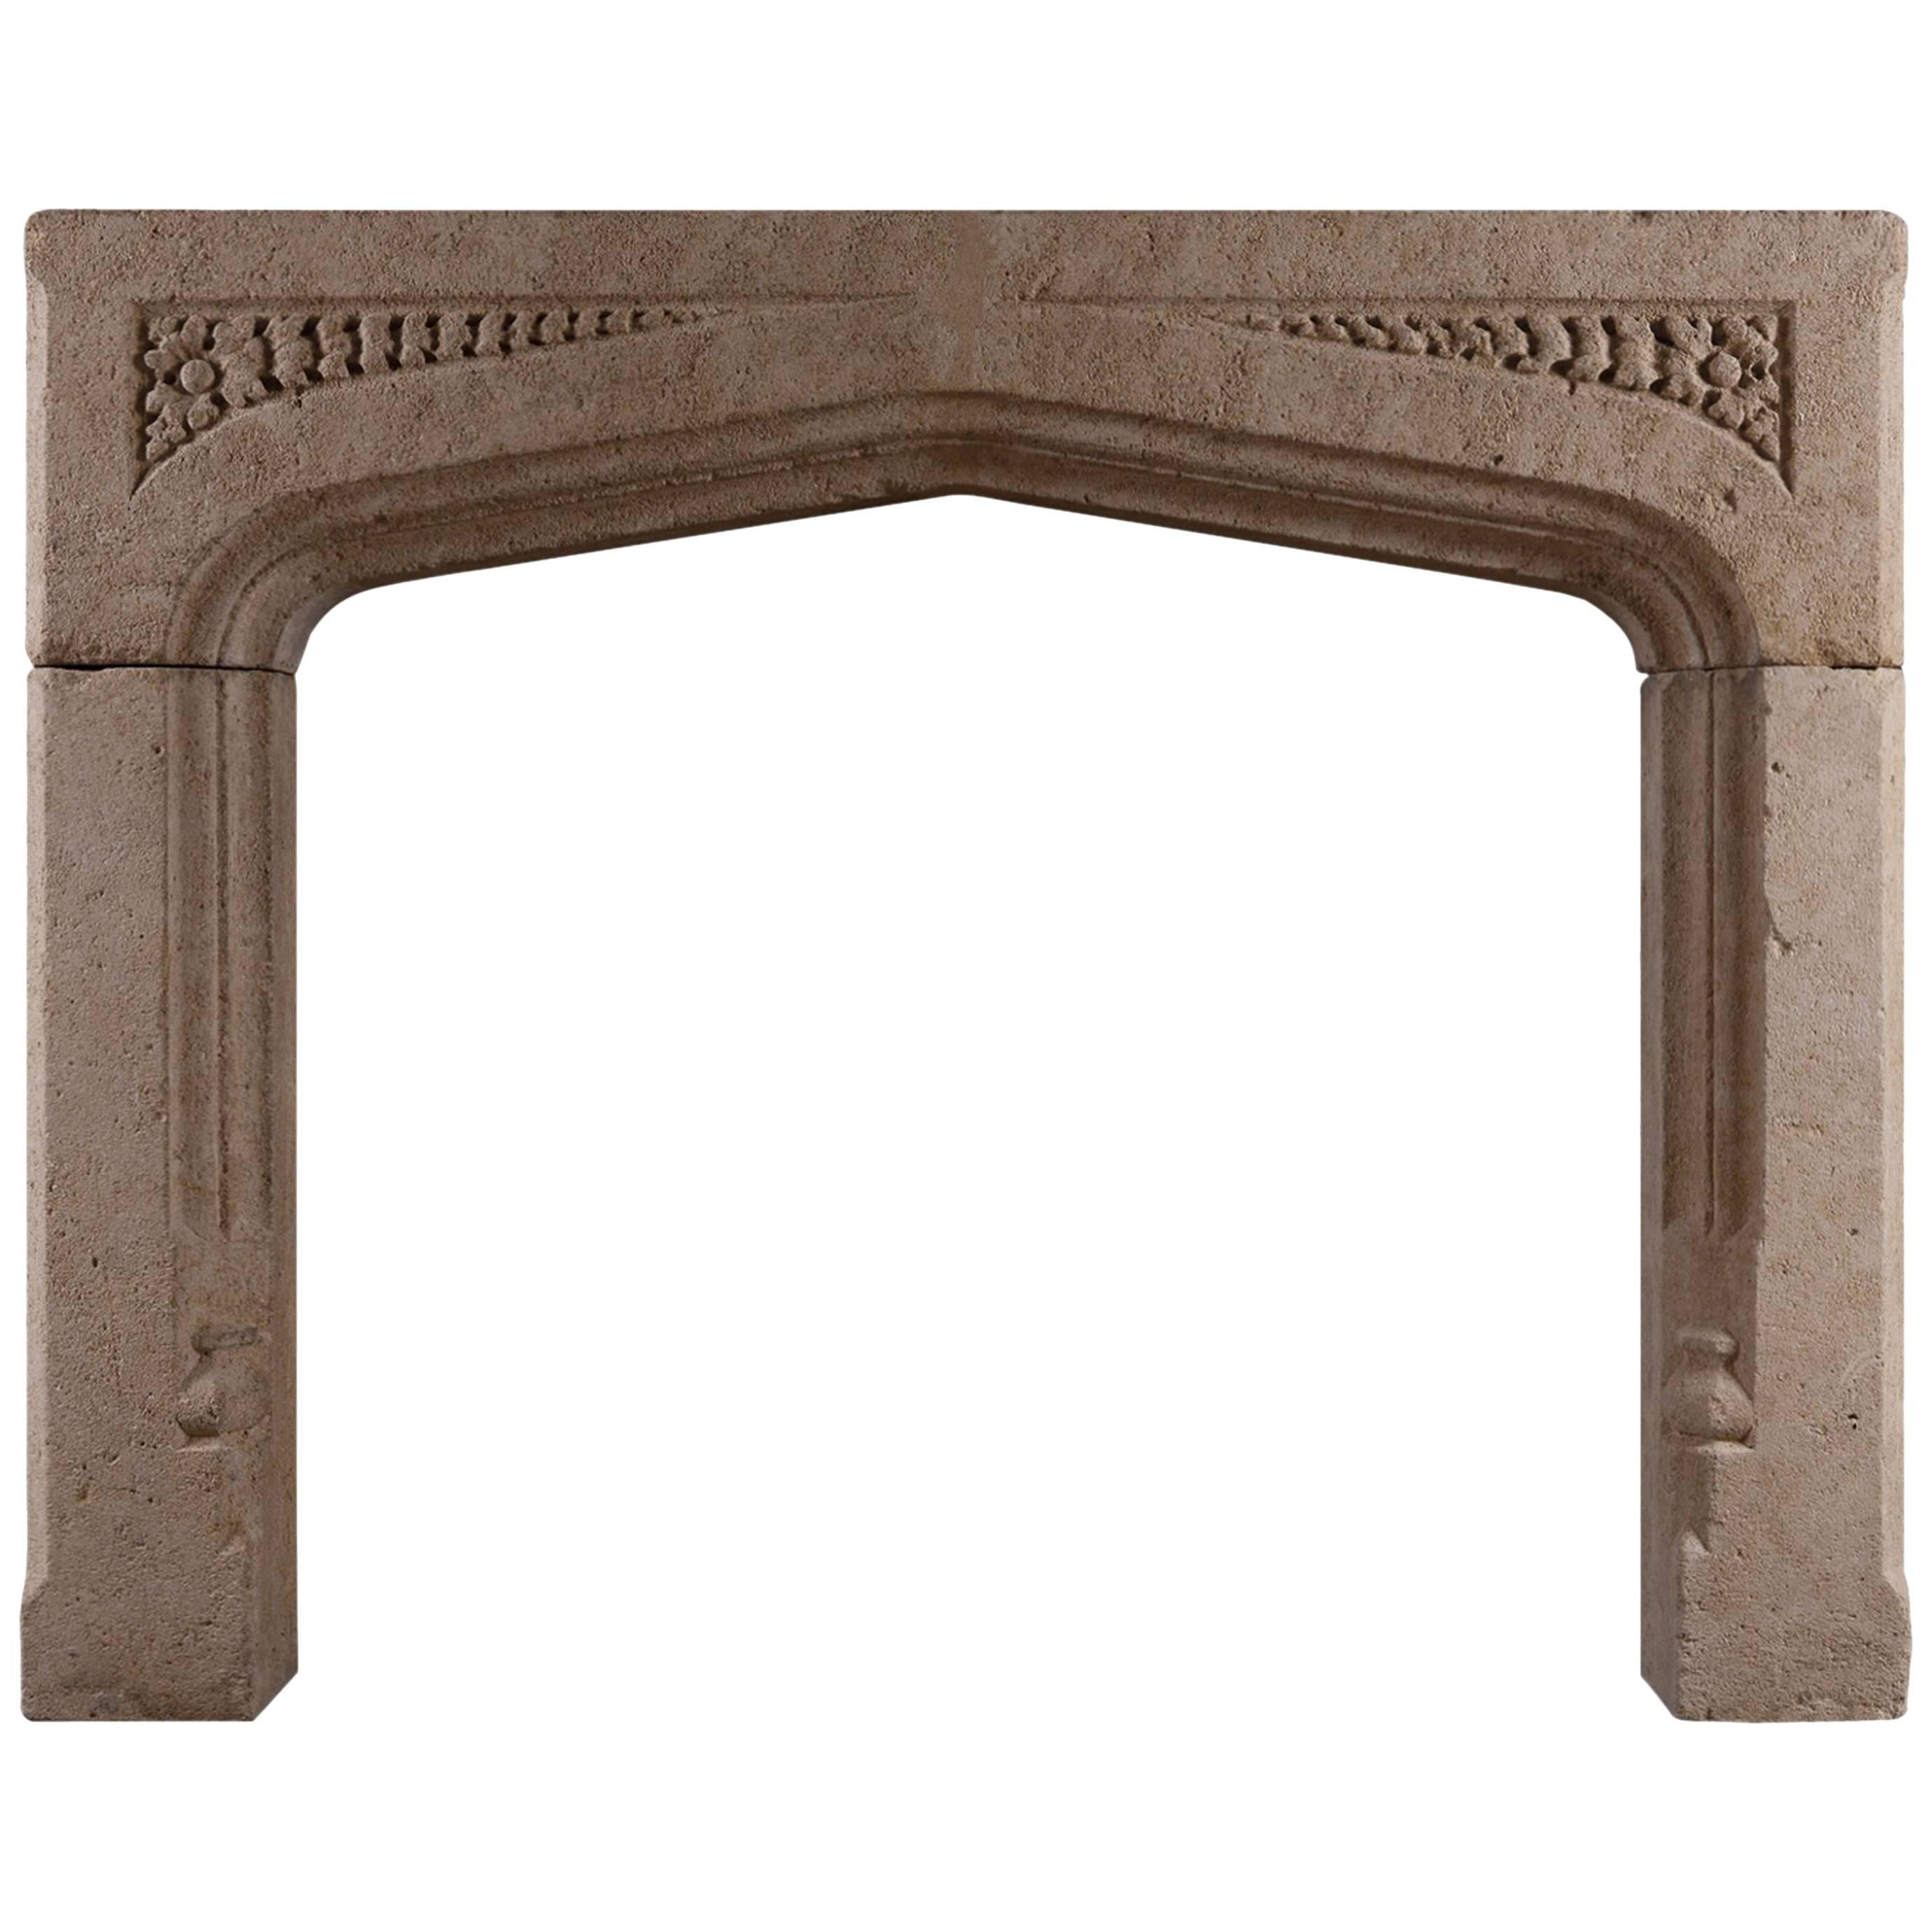 Gothic Revival Stone Fireplace